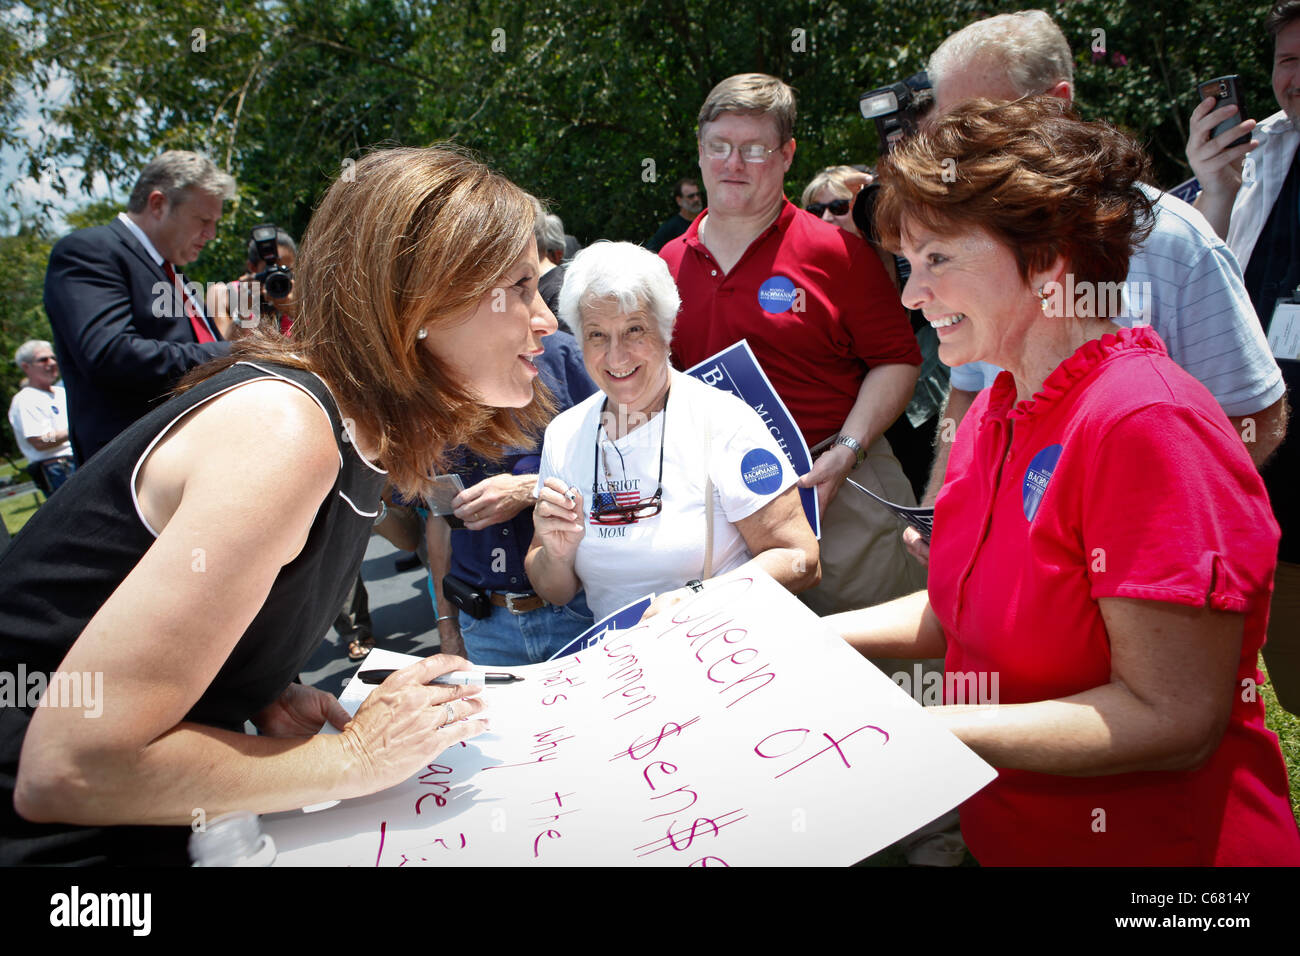 Conservative Republican US Presidential candidate Michelle Bachmann campaigns in Columbia, SC Stock Photo